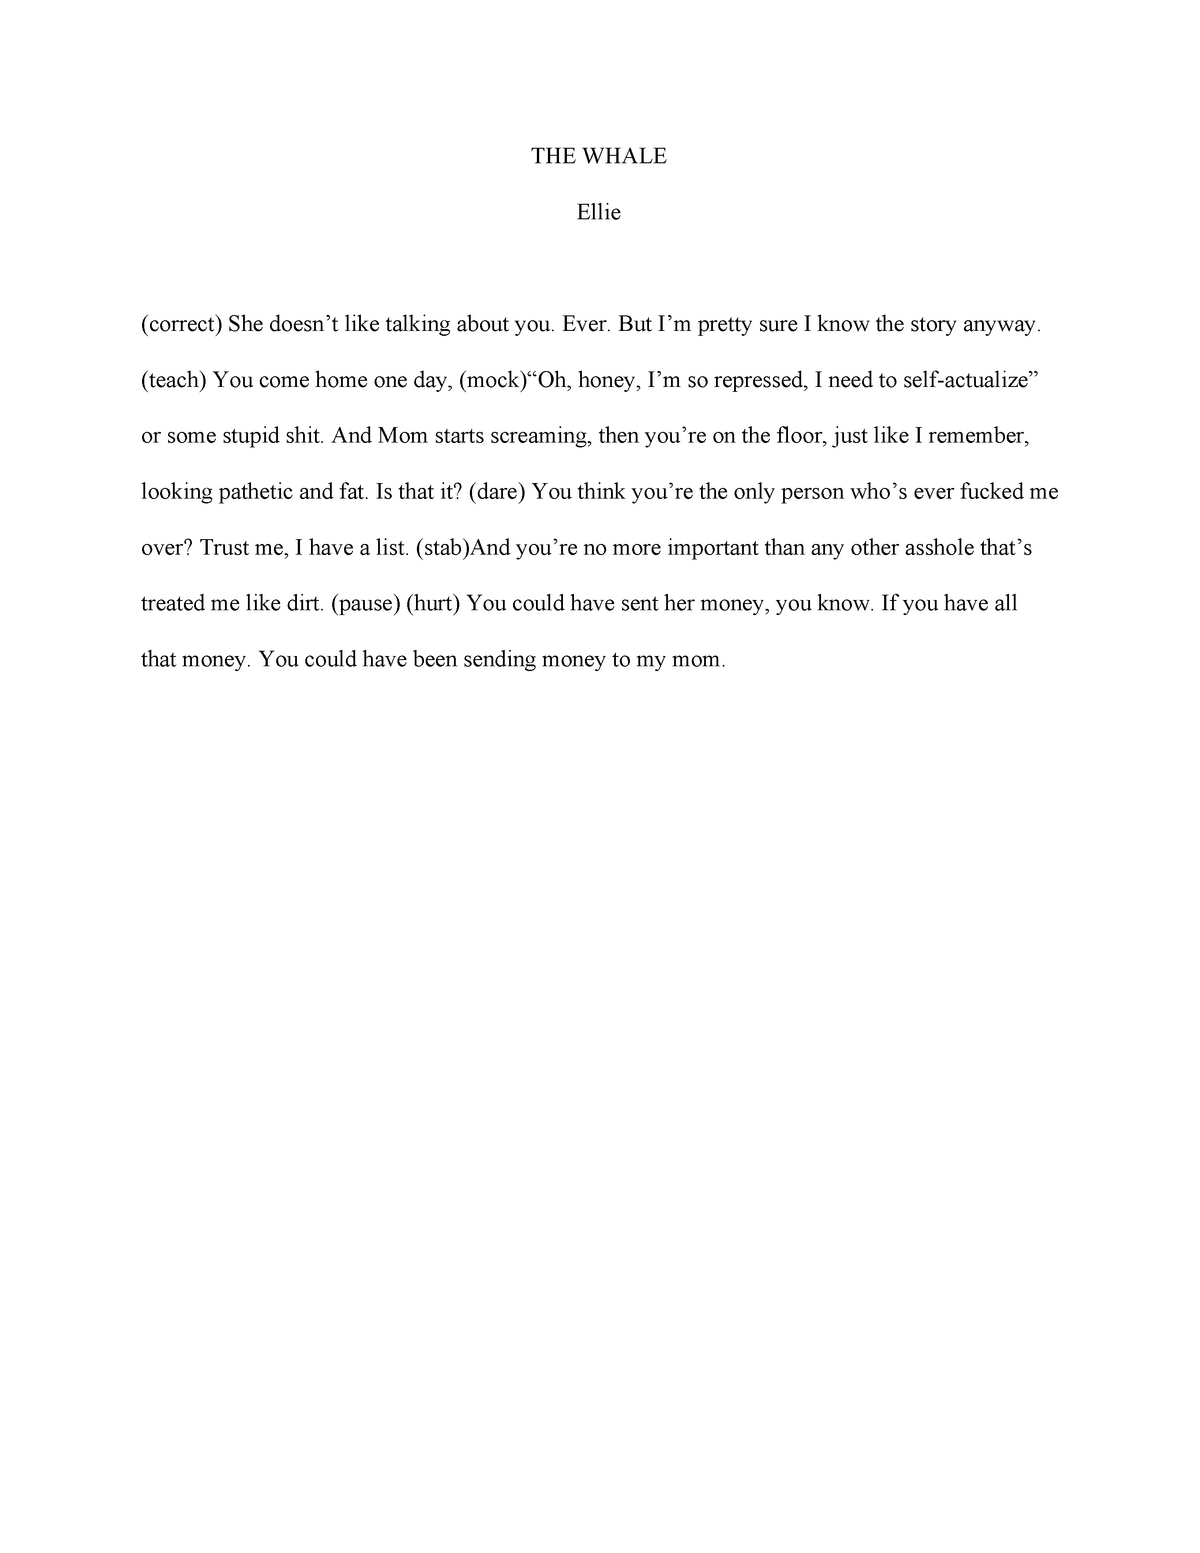 ellie's essay from the whale movie